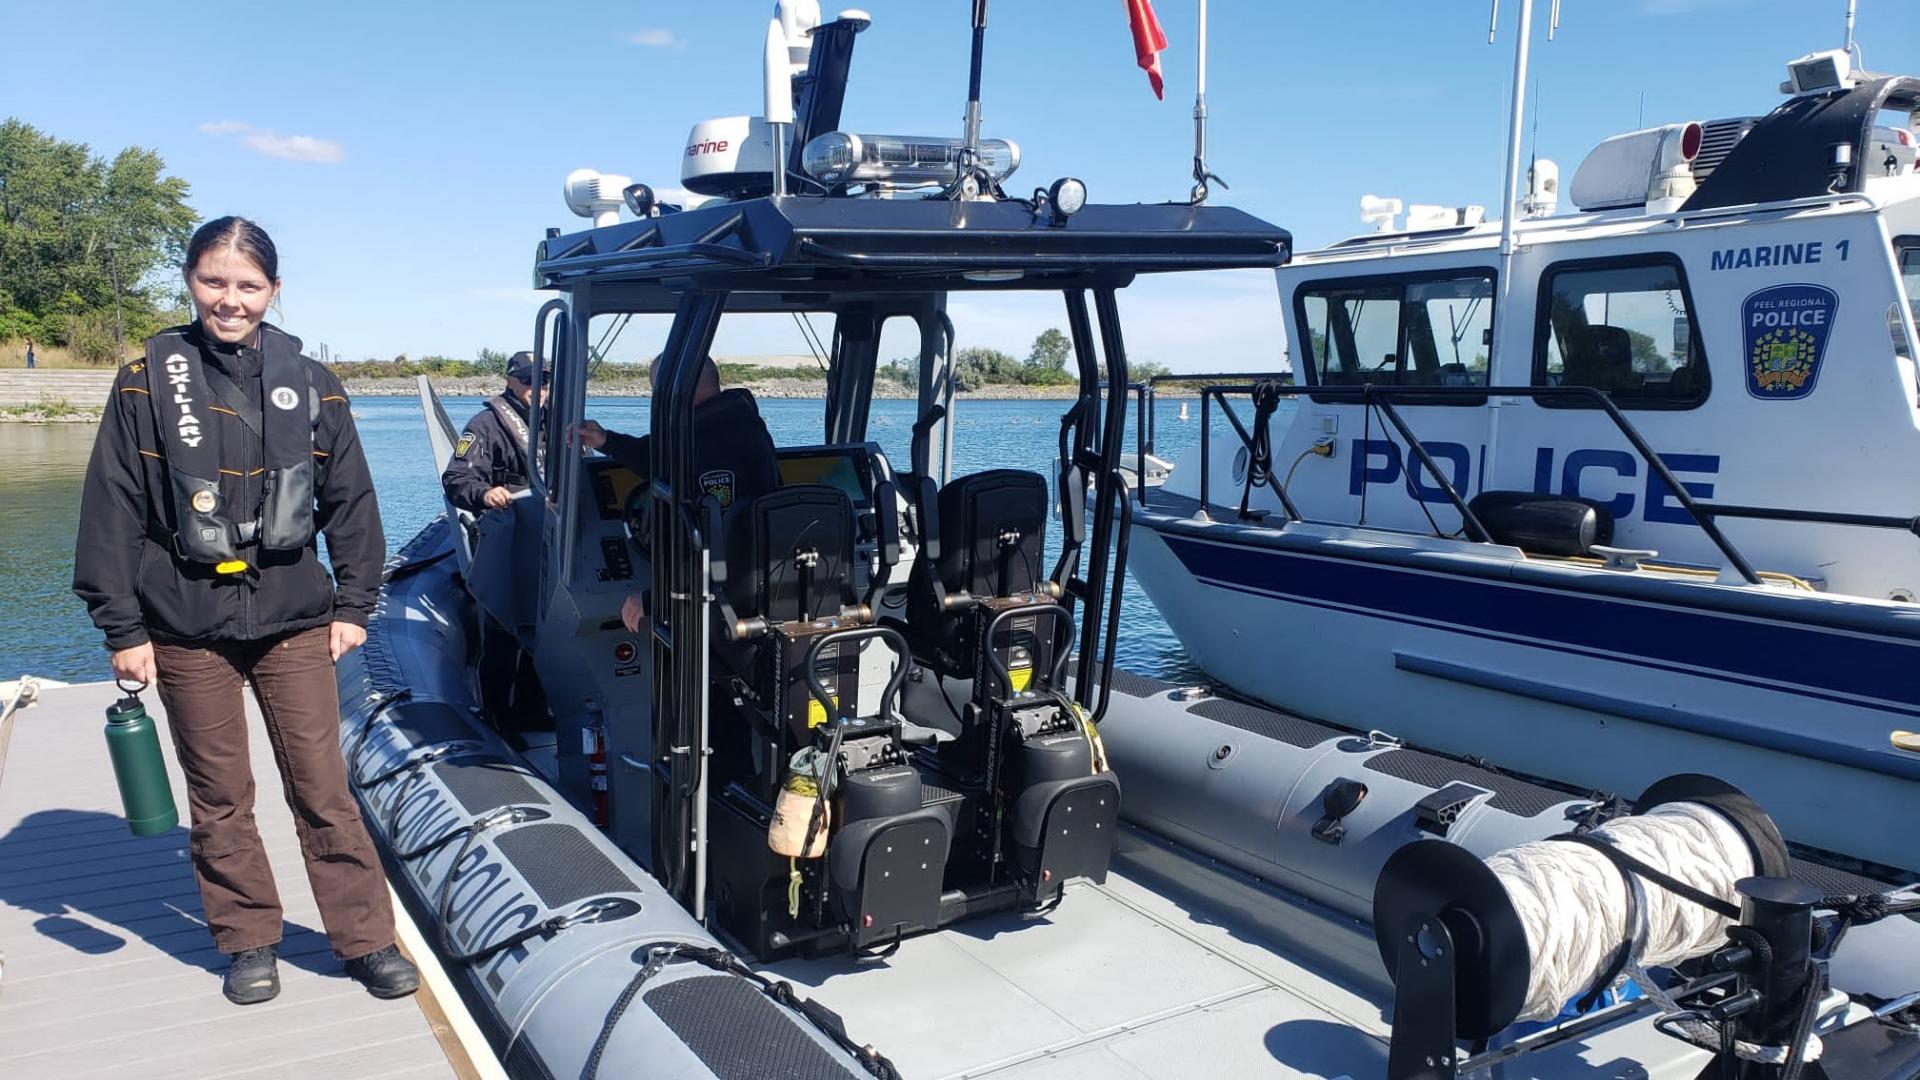 Nollner on the dock with the Peel Police Police boat 